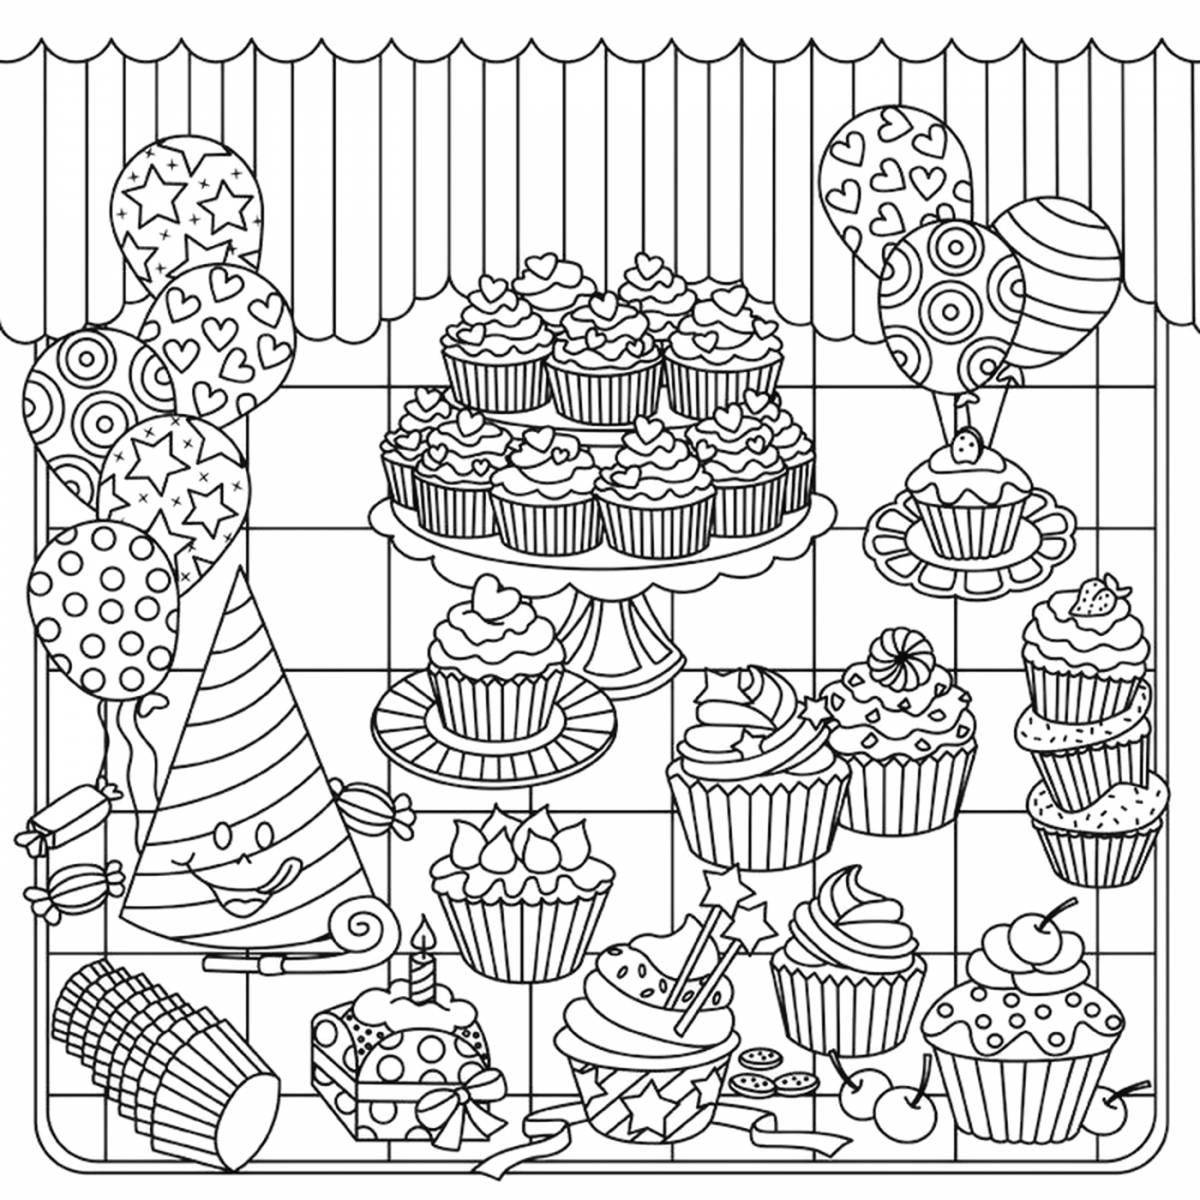 Coloring pages cute sweets for girls